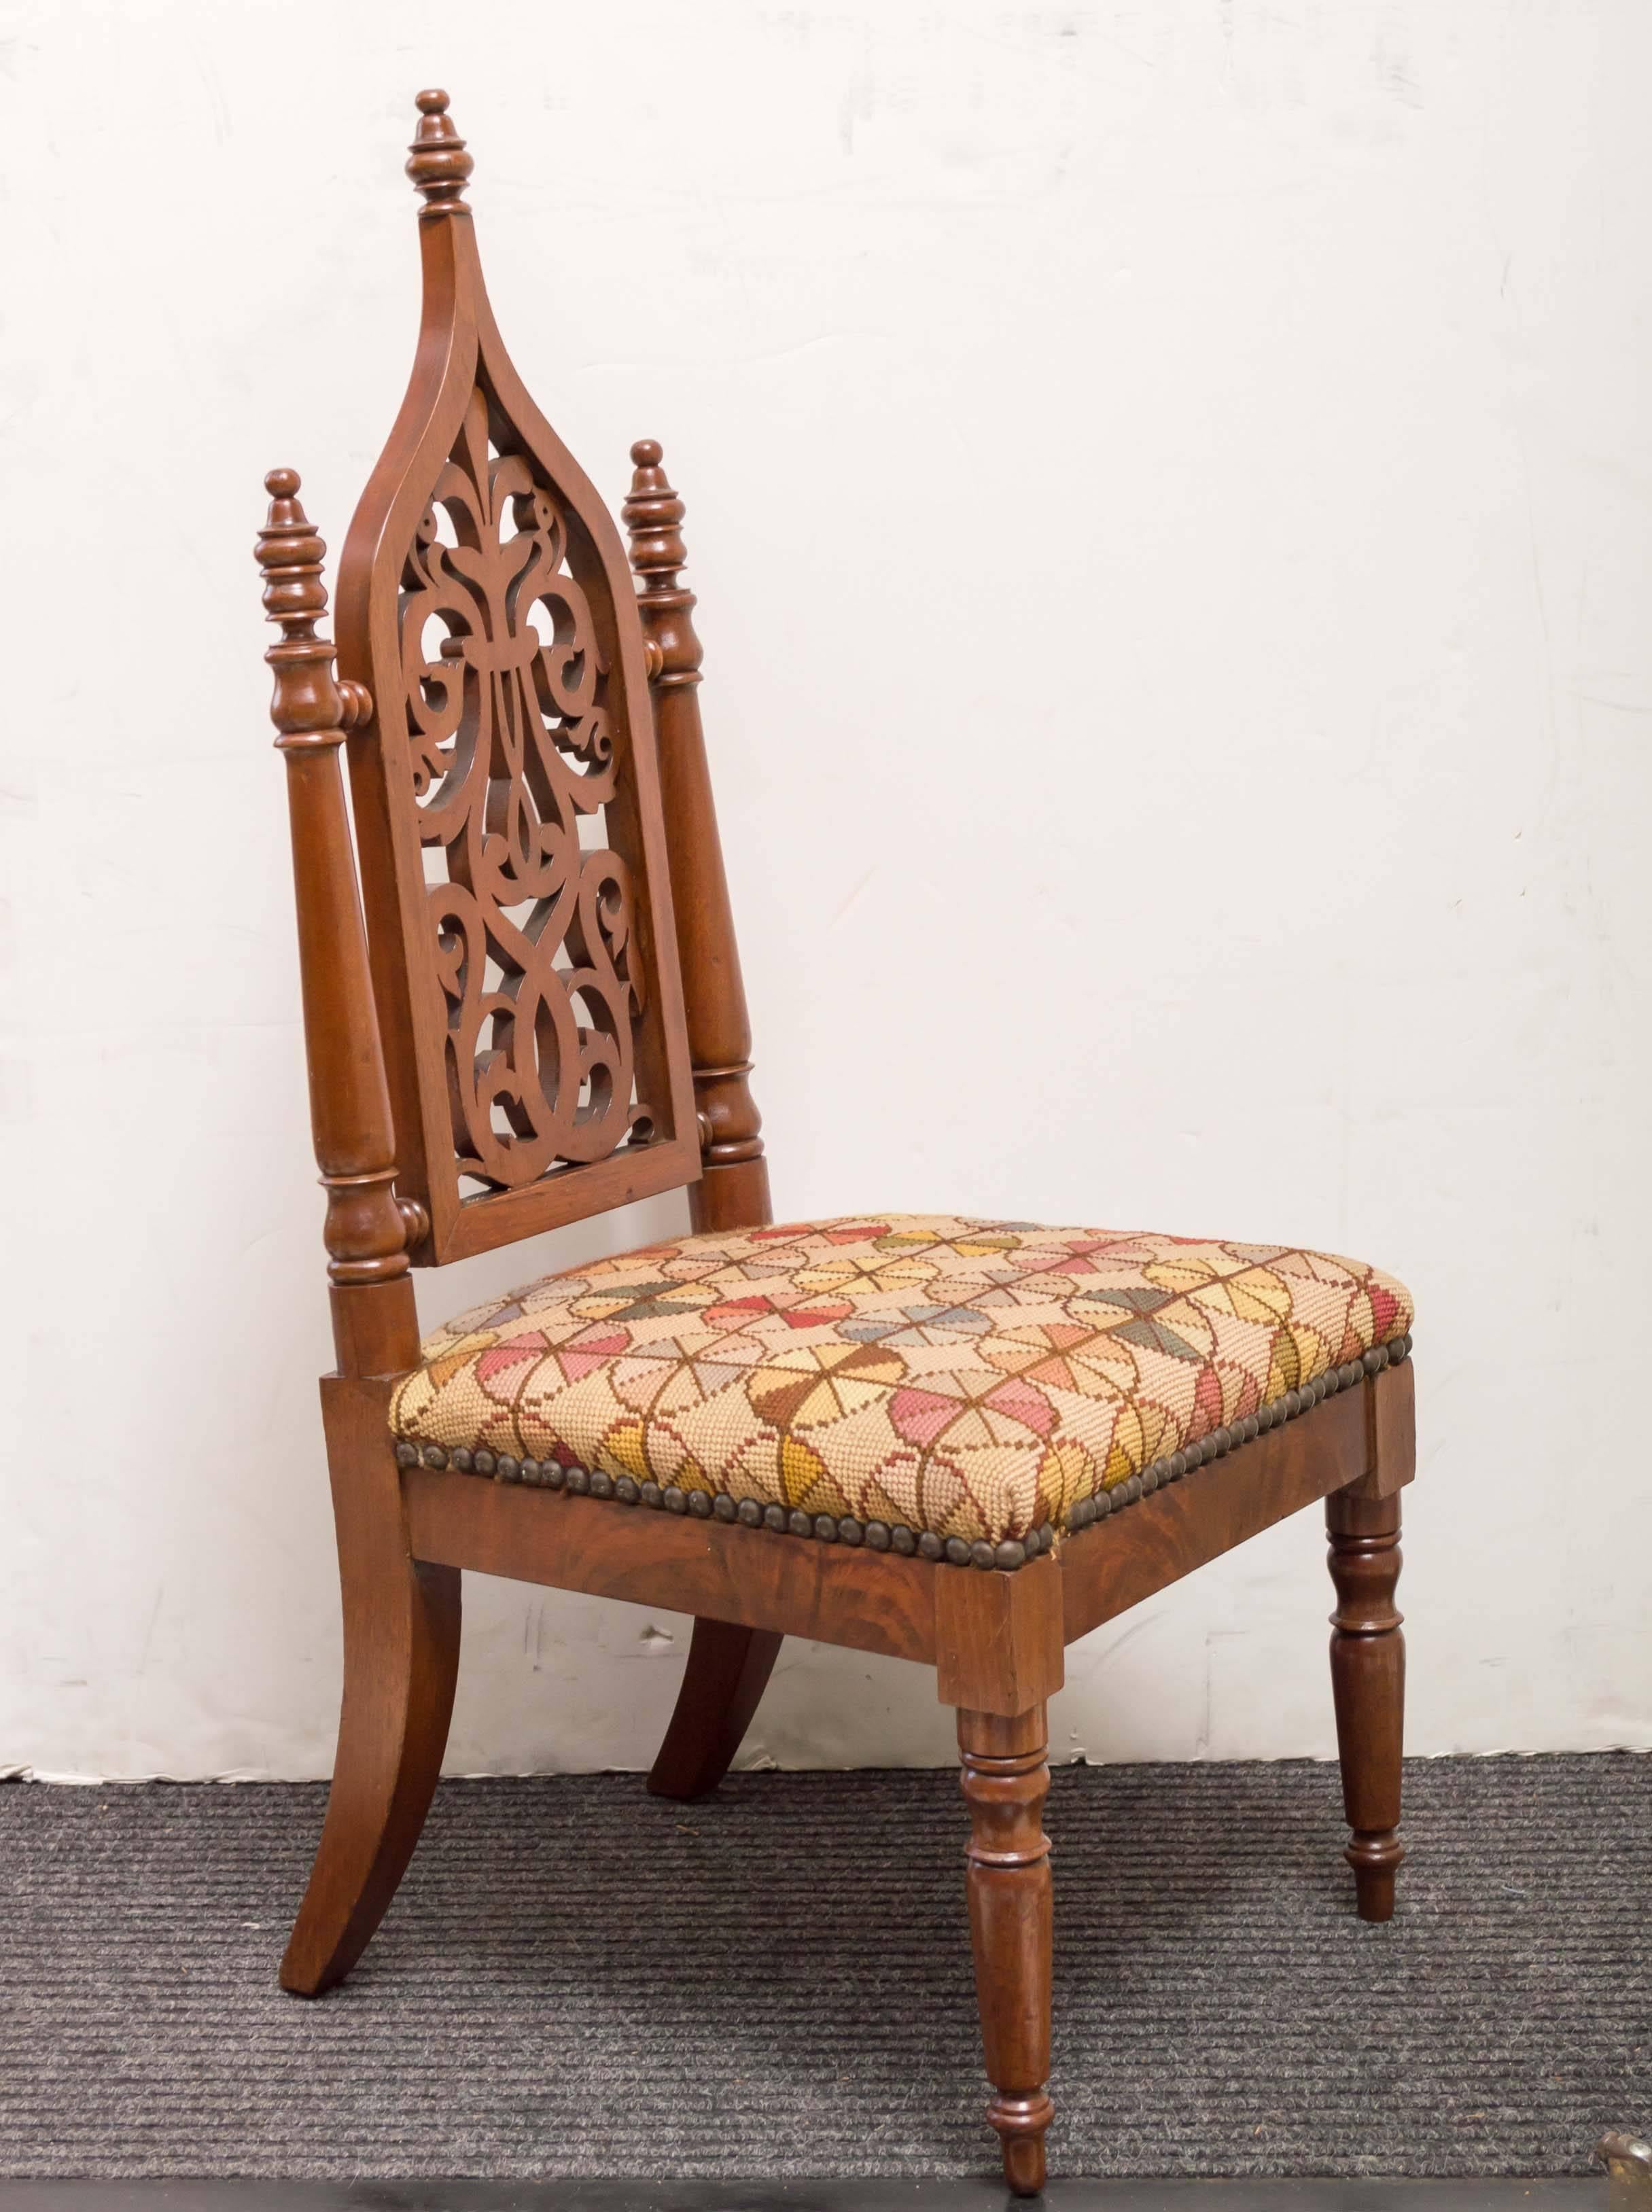 19th century American Neo-Gothic childs chair, circa 1860. Great as a decorative object or use as a taboret. Fine detail woodwork and hand-stitched needlepoint cover. An old surface of mellow walnut.